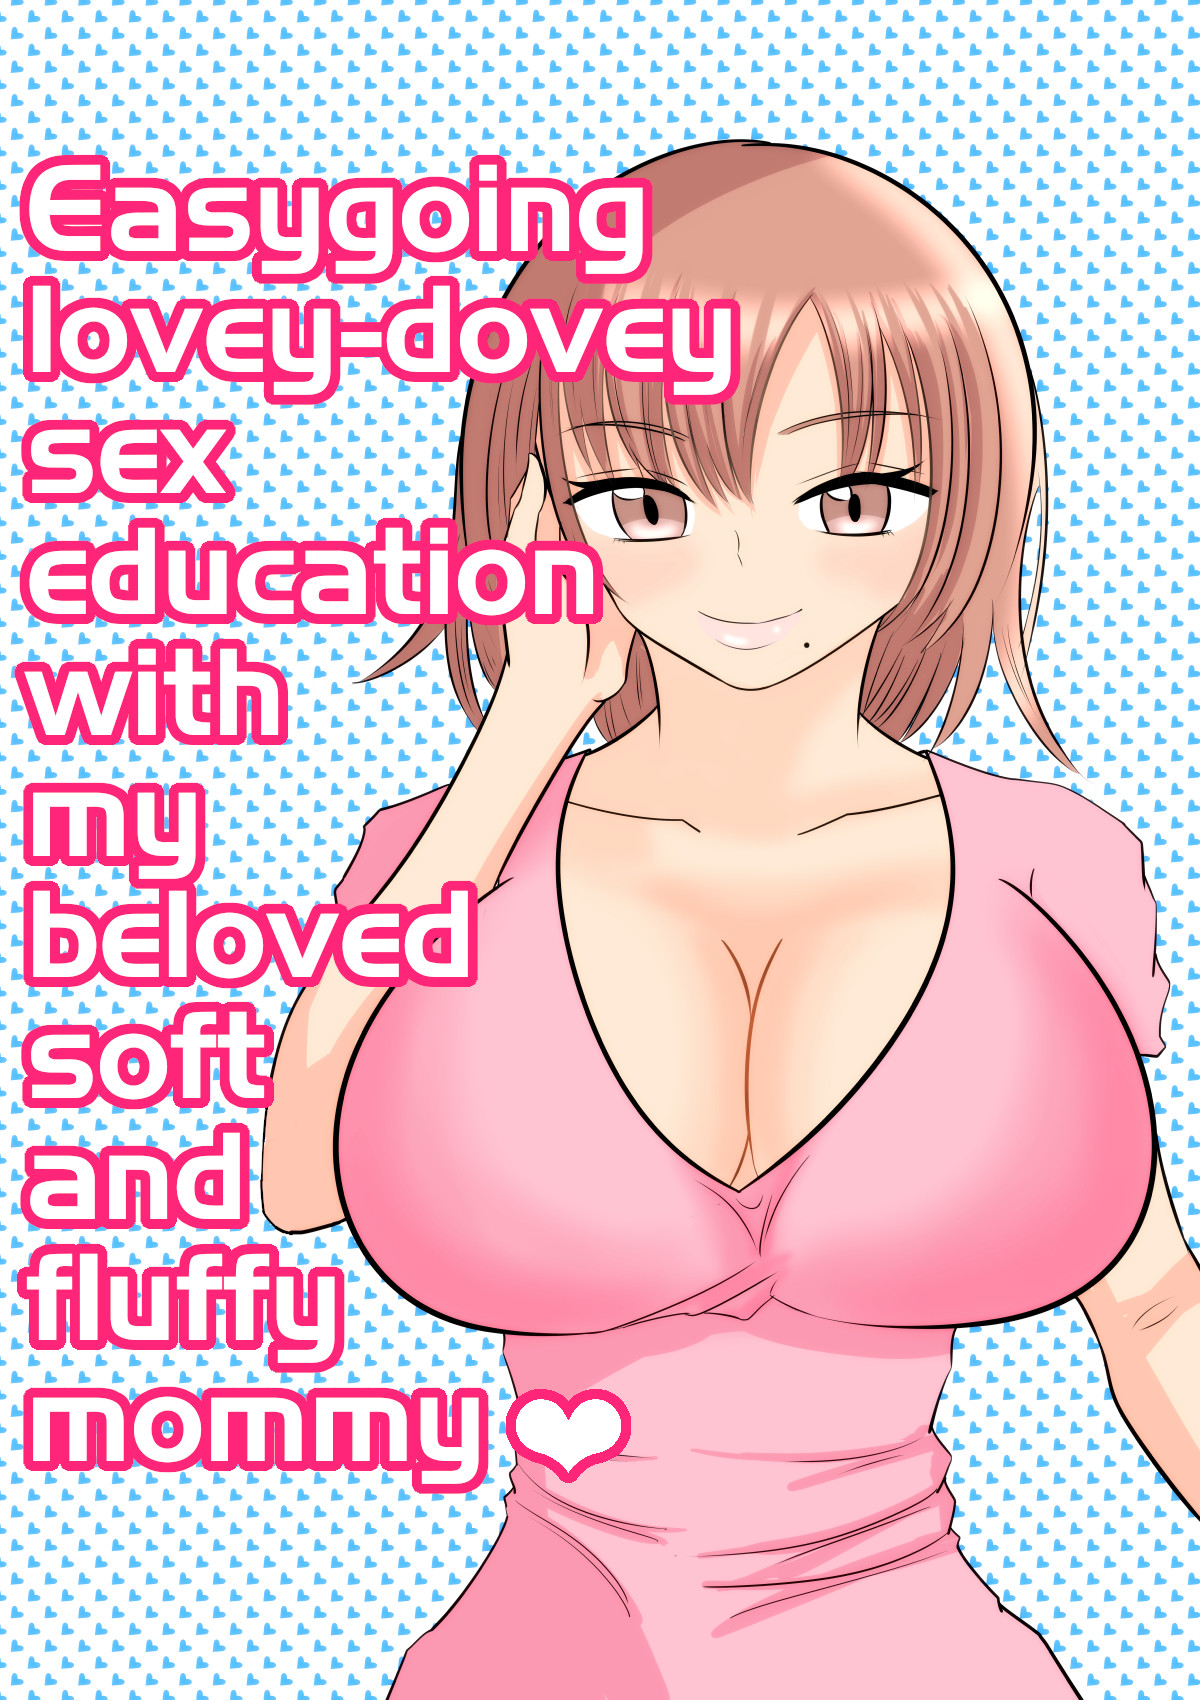 Hentai Manga Comic-Easygoing Lovey-Dovey Sex Education With My Beloved Soft and Fluffy Mommy-Read-1